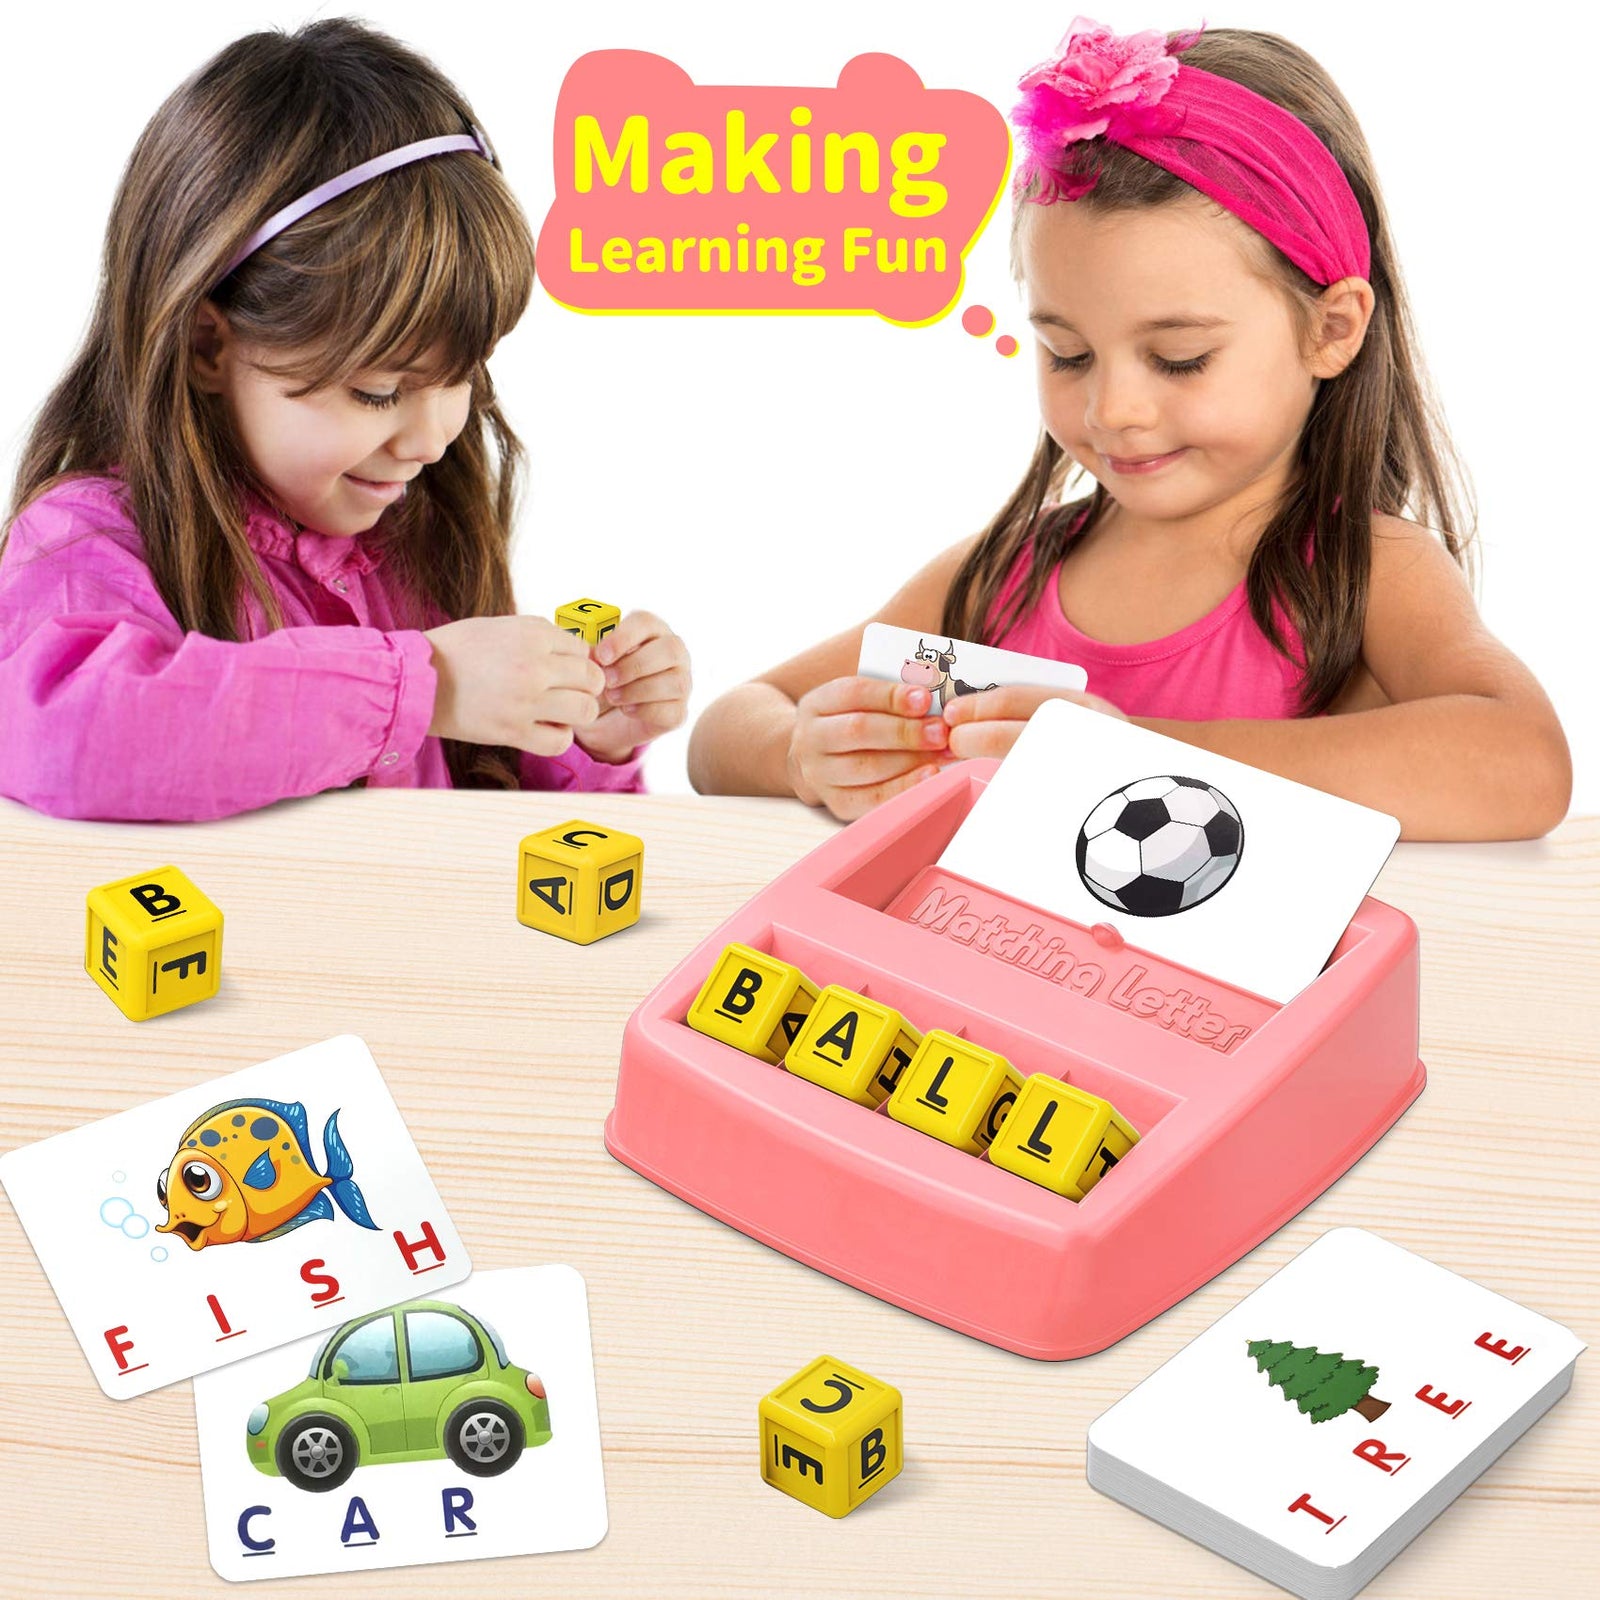 NARRIO Educational Toys for 3 4 5 Year Old Girls Gifts, Matching Letter Spelling Games Learning Toys for Kids Ages 3 4 5, Christmas Birthday Gifts for 3-6 Year Old Girls Toddler Toys Age 2-4